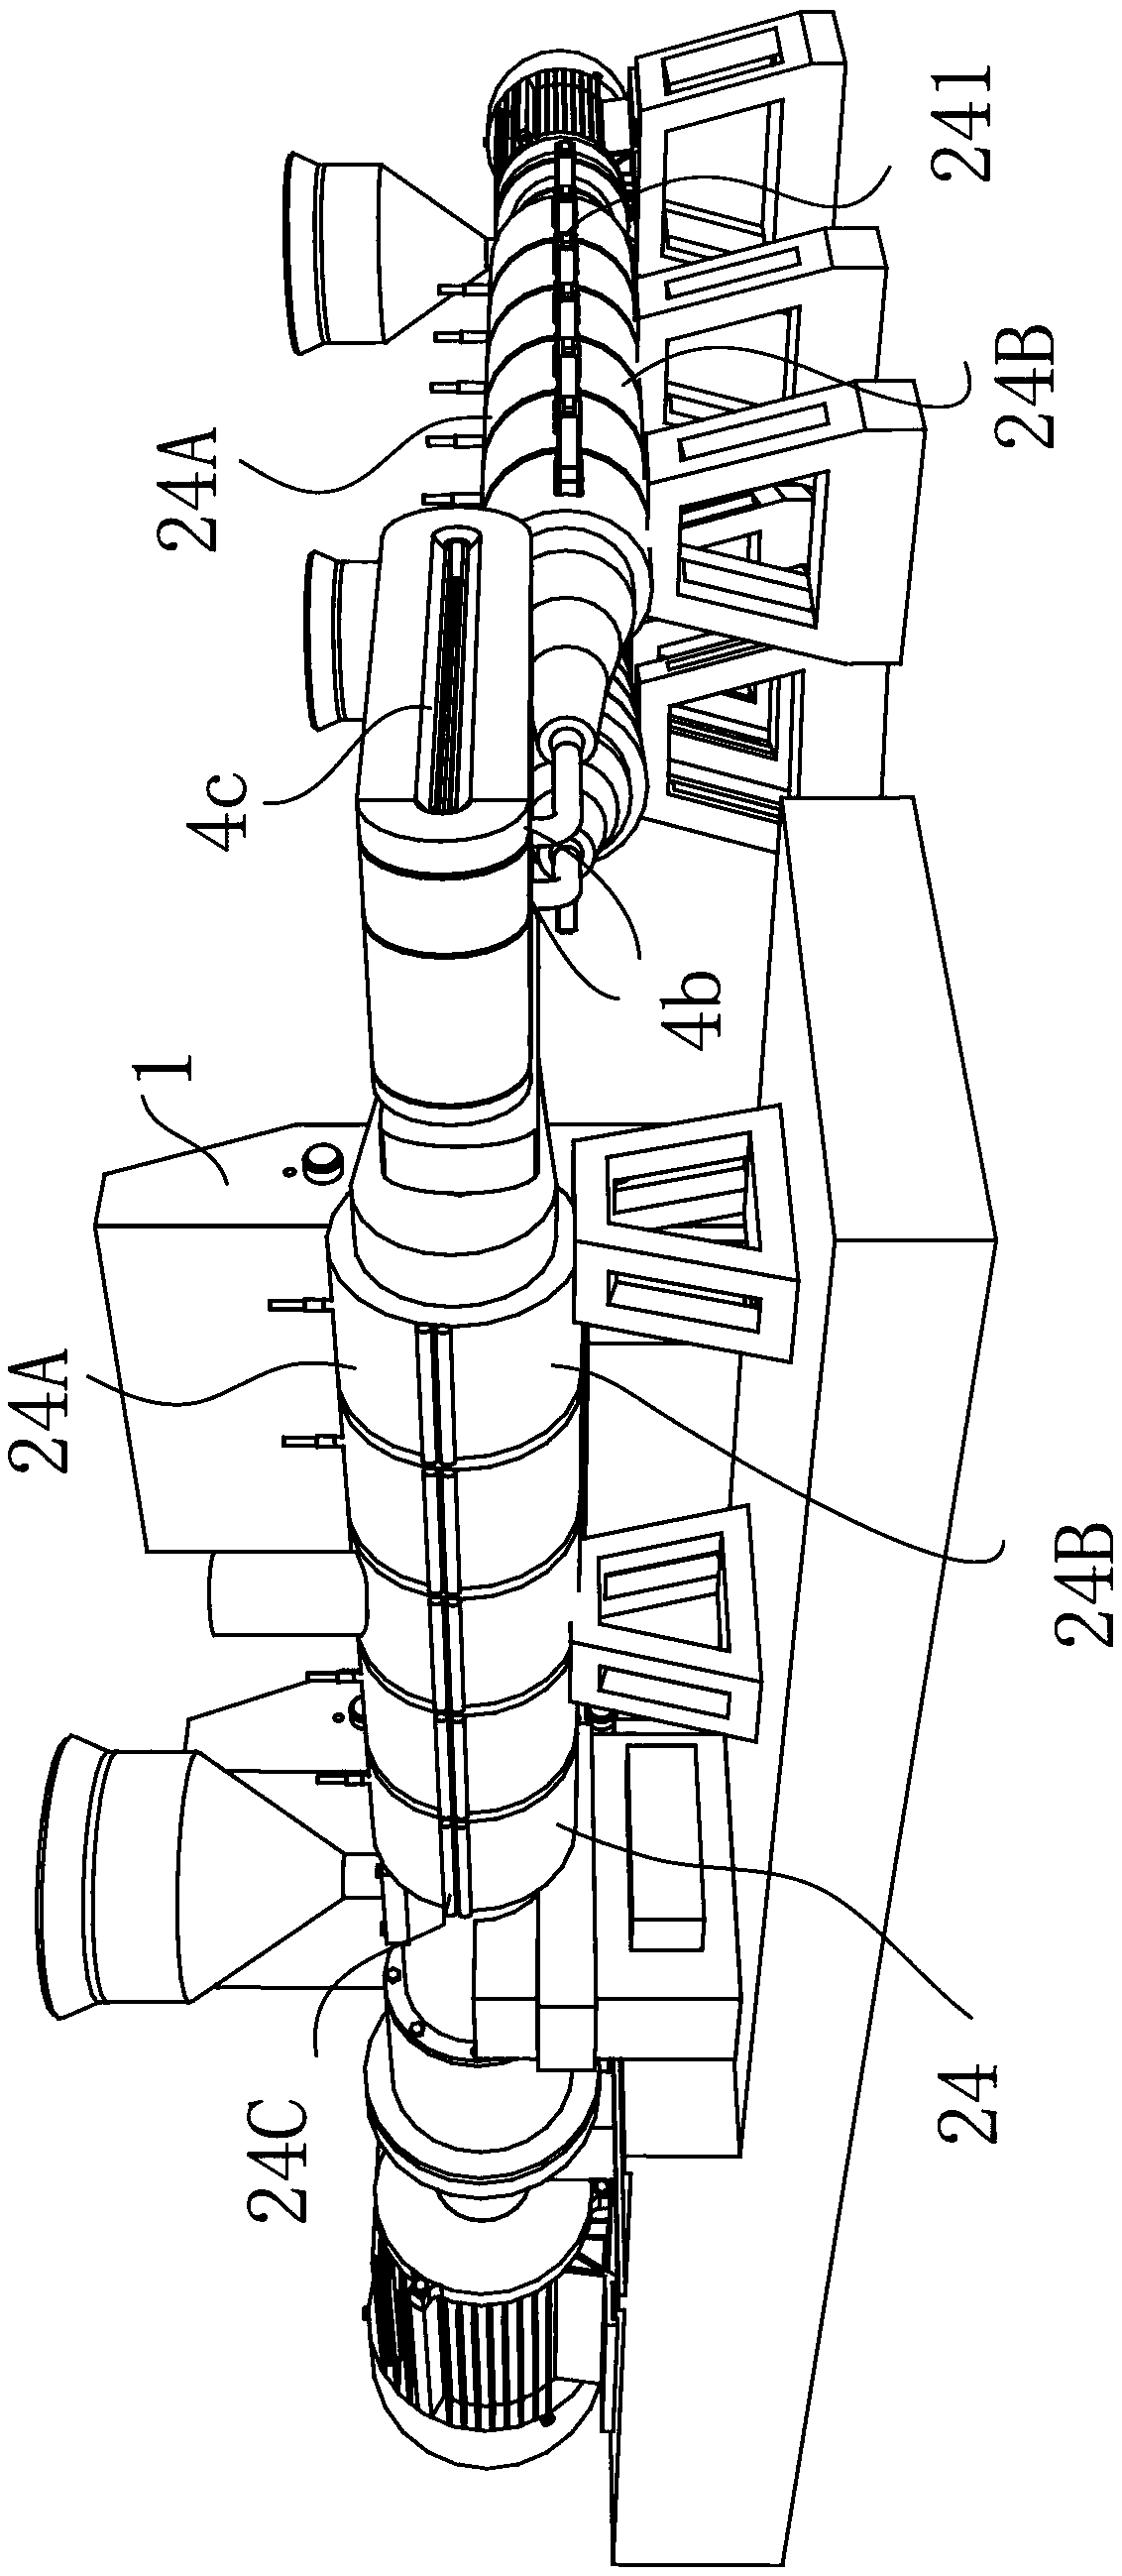 Operation method of PET wood-plastic composite manufacturing device